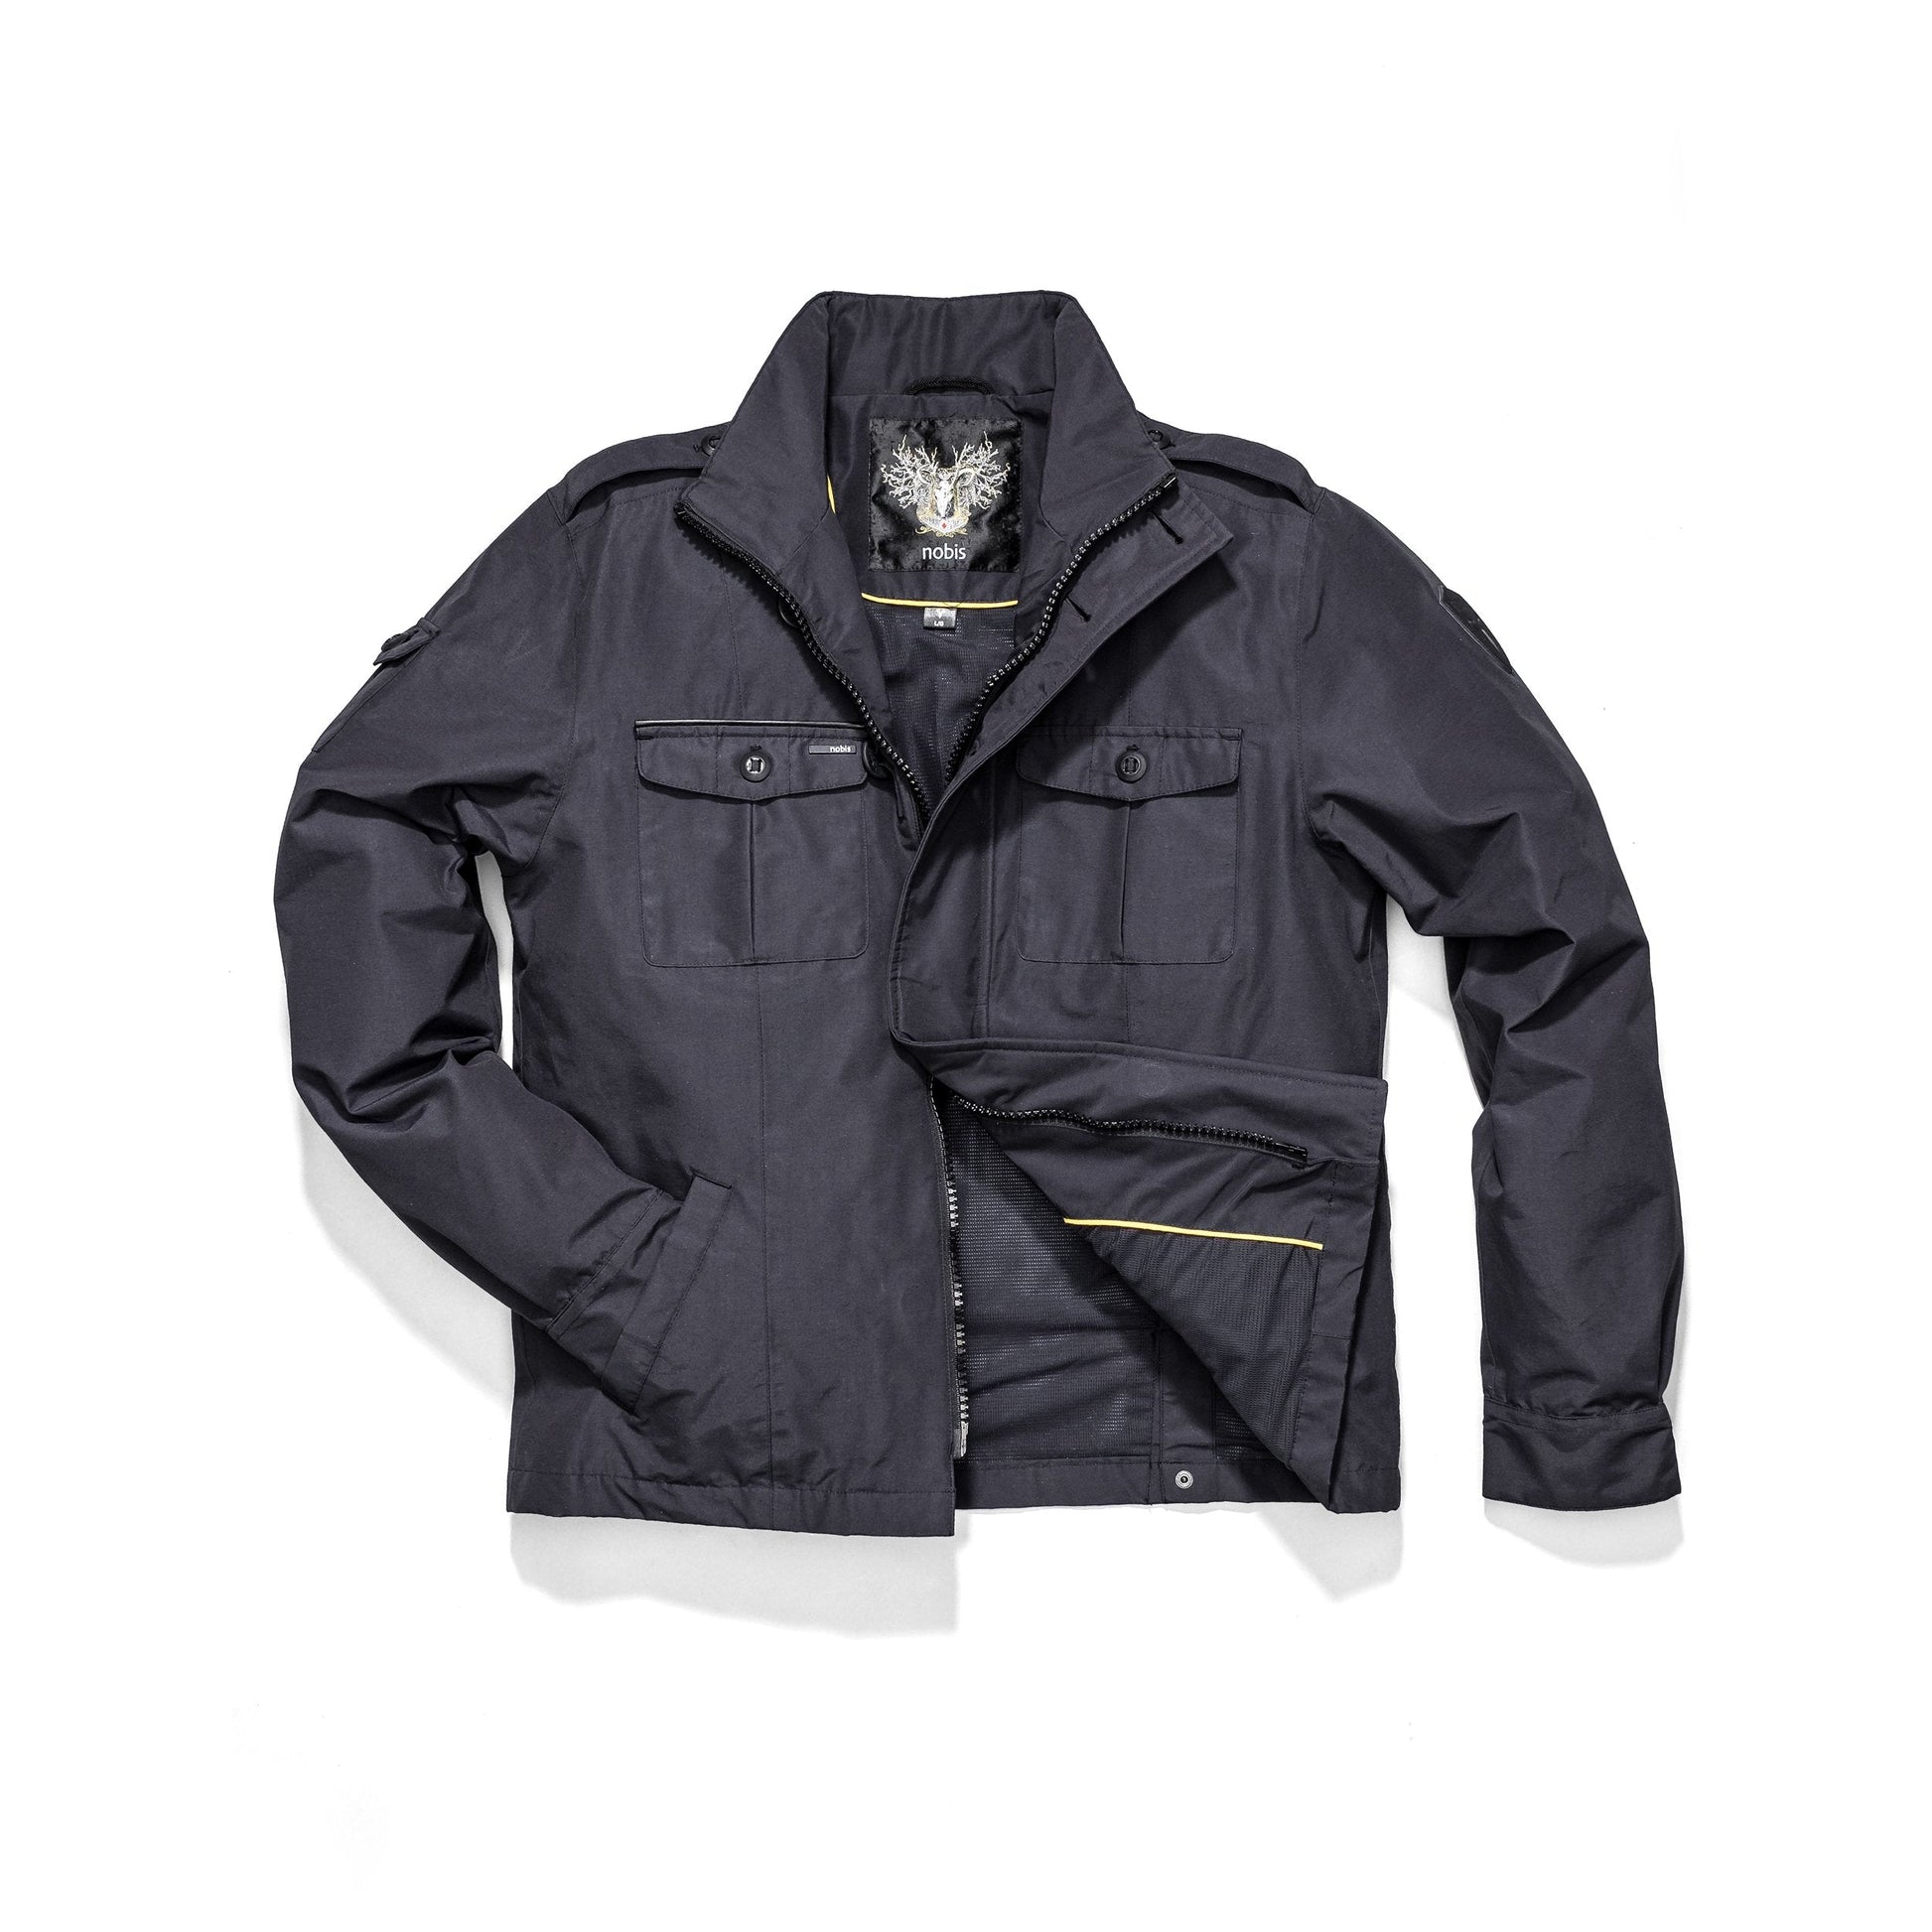 Men's waist length military style jacket in Navy